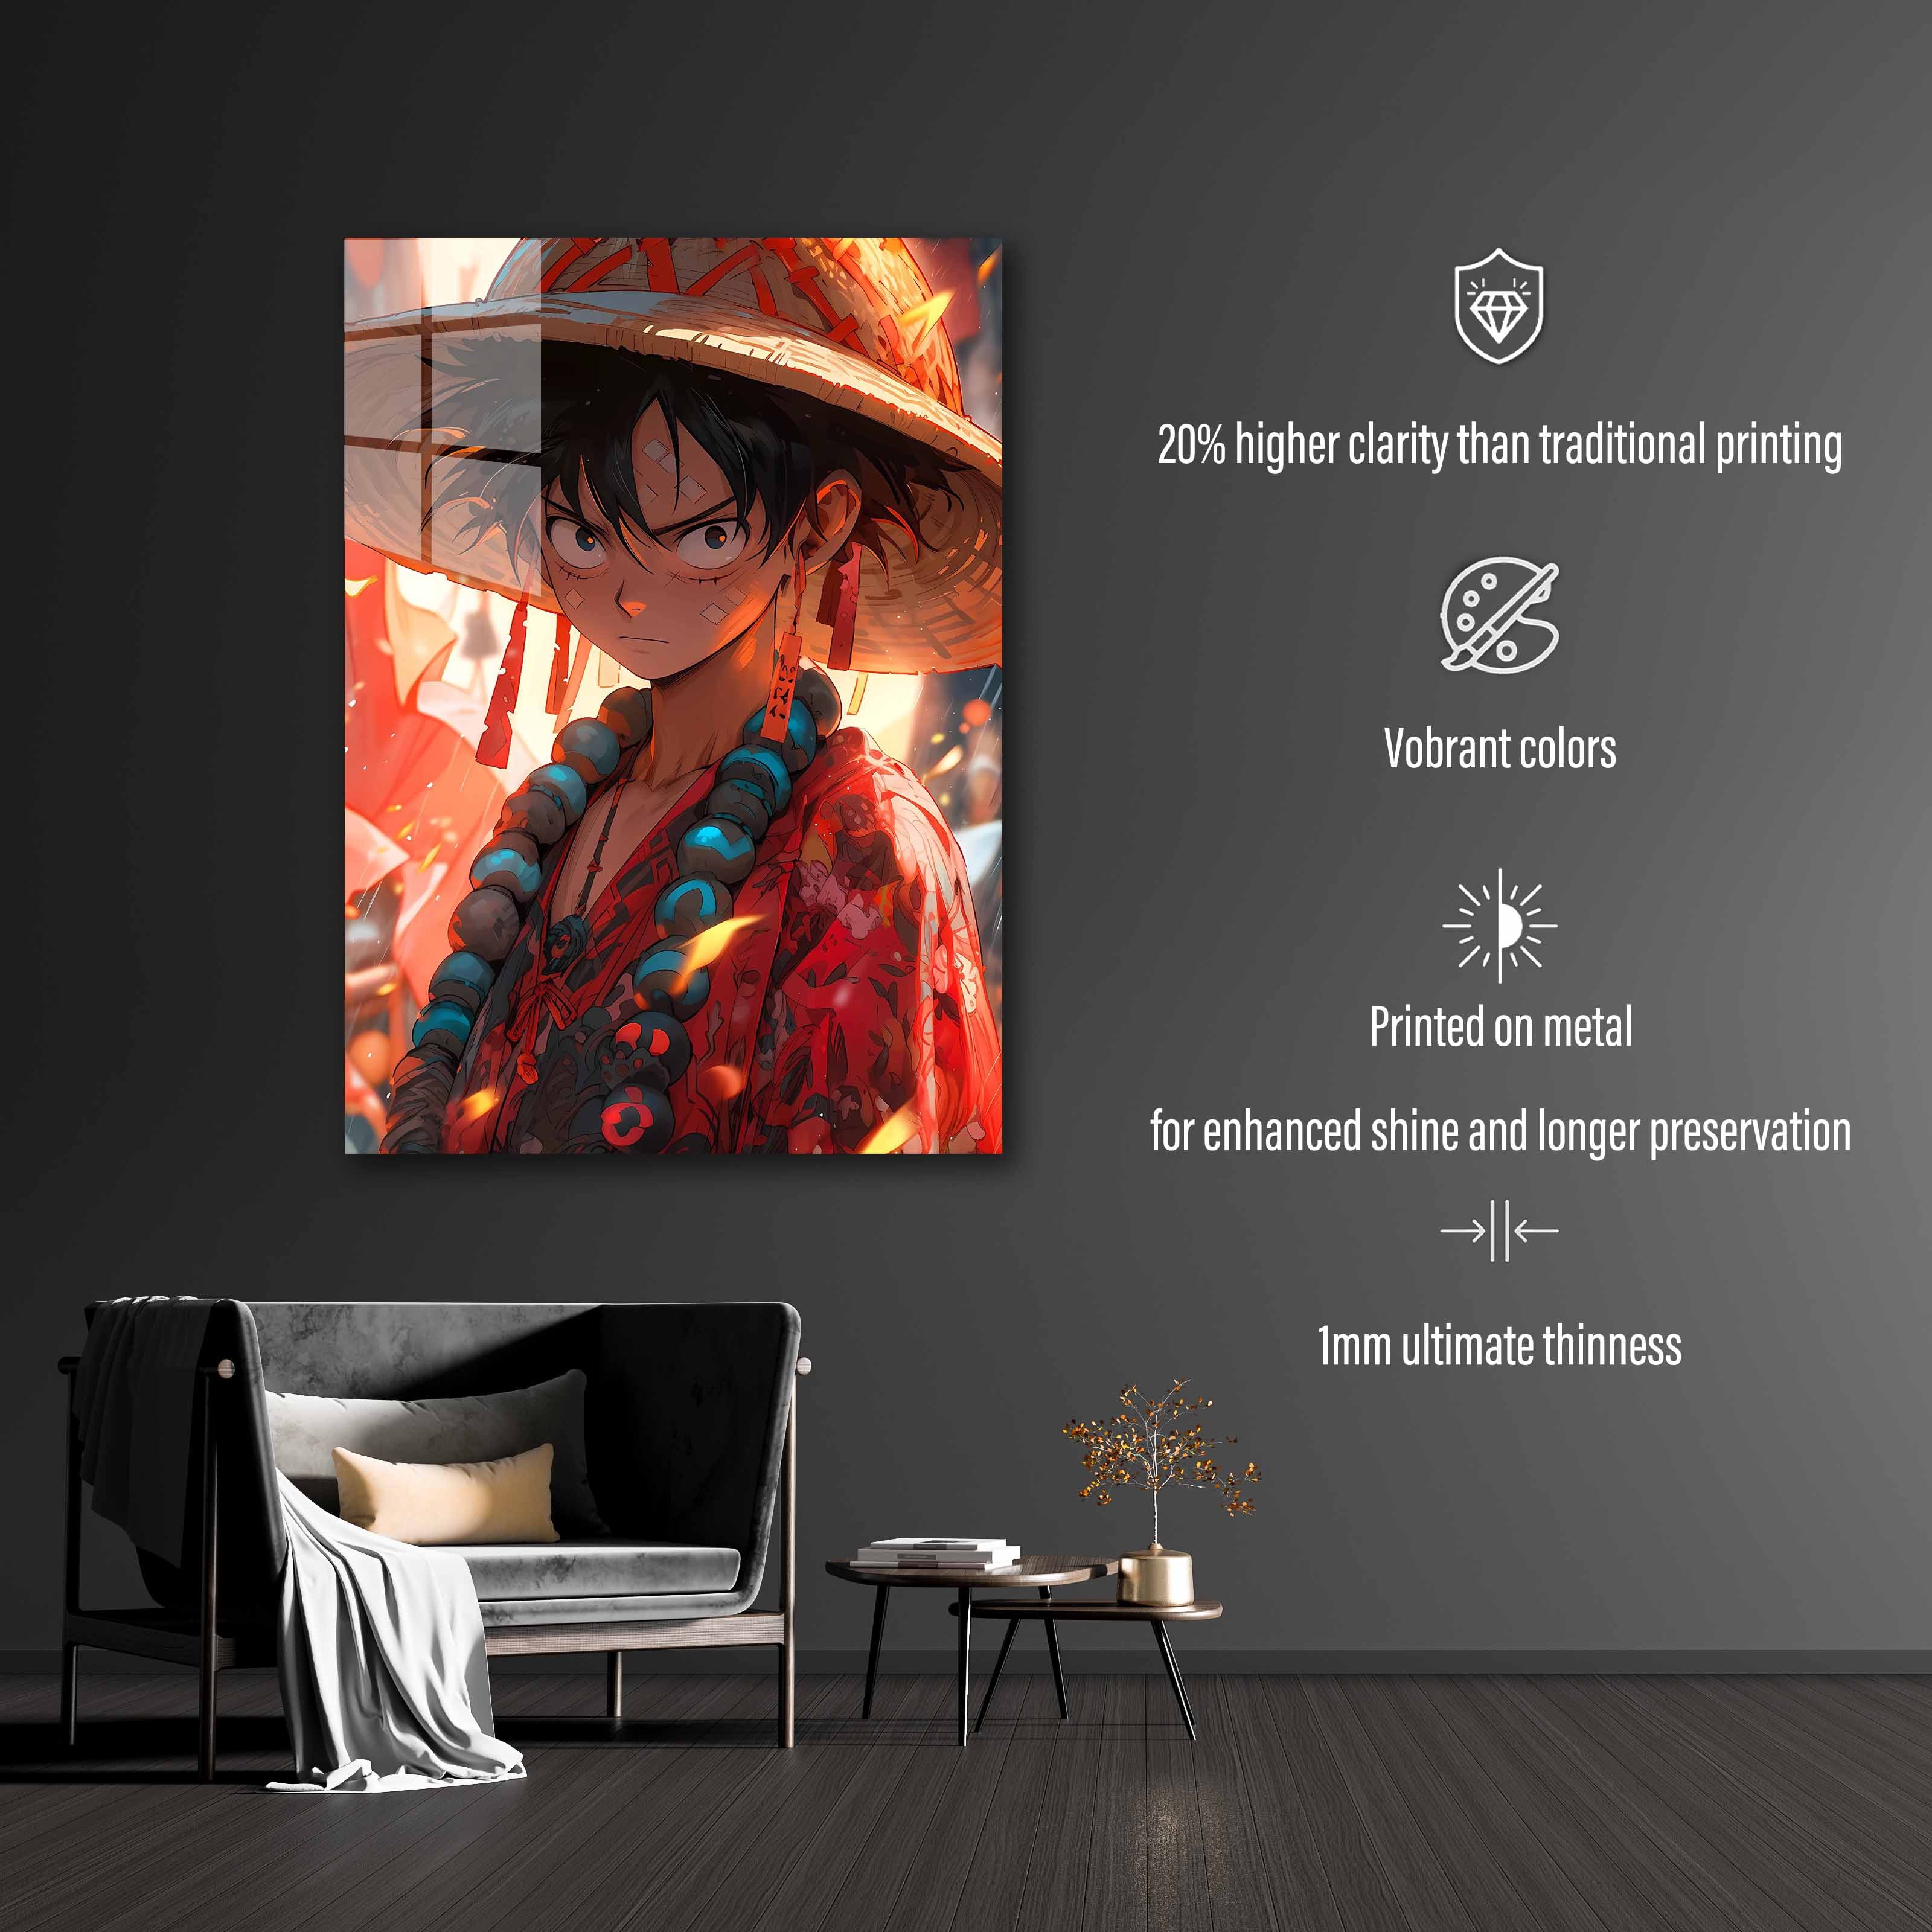 Chinese luffy-designed by @Minty Art